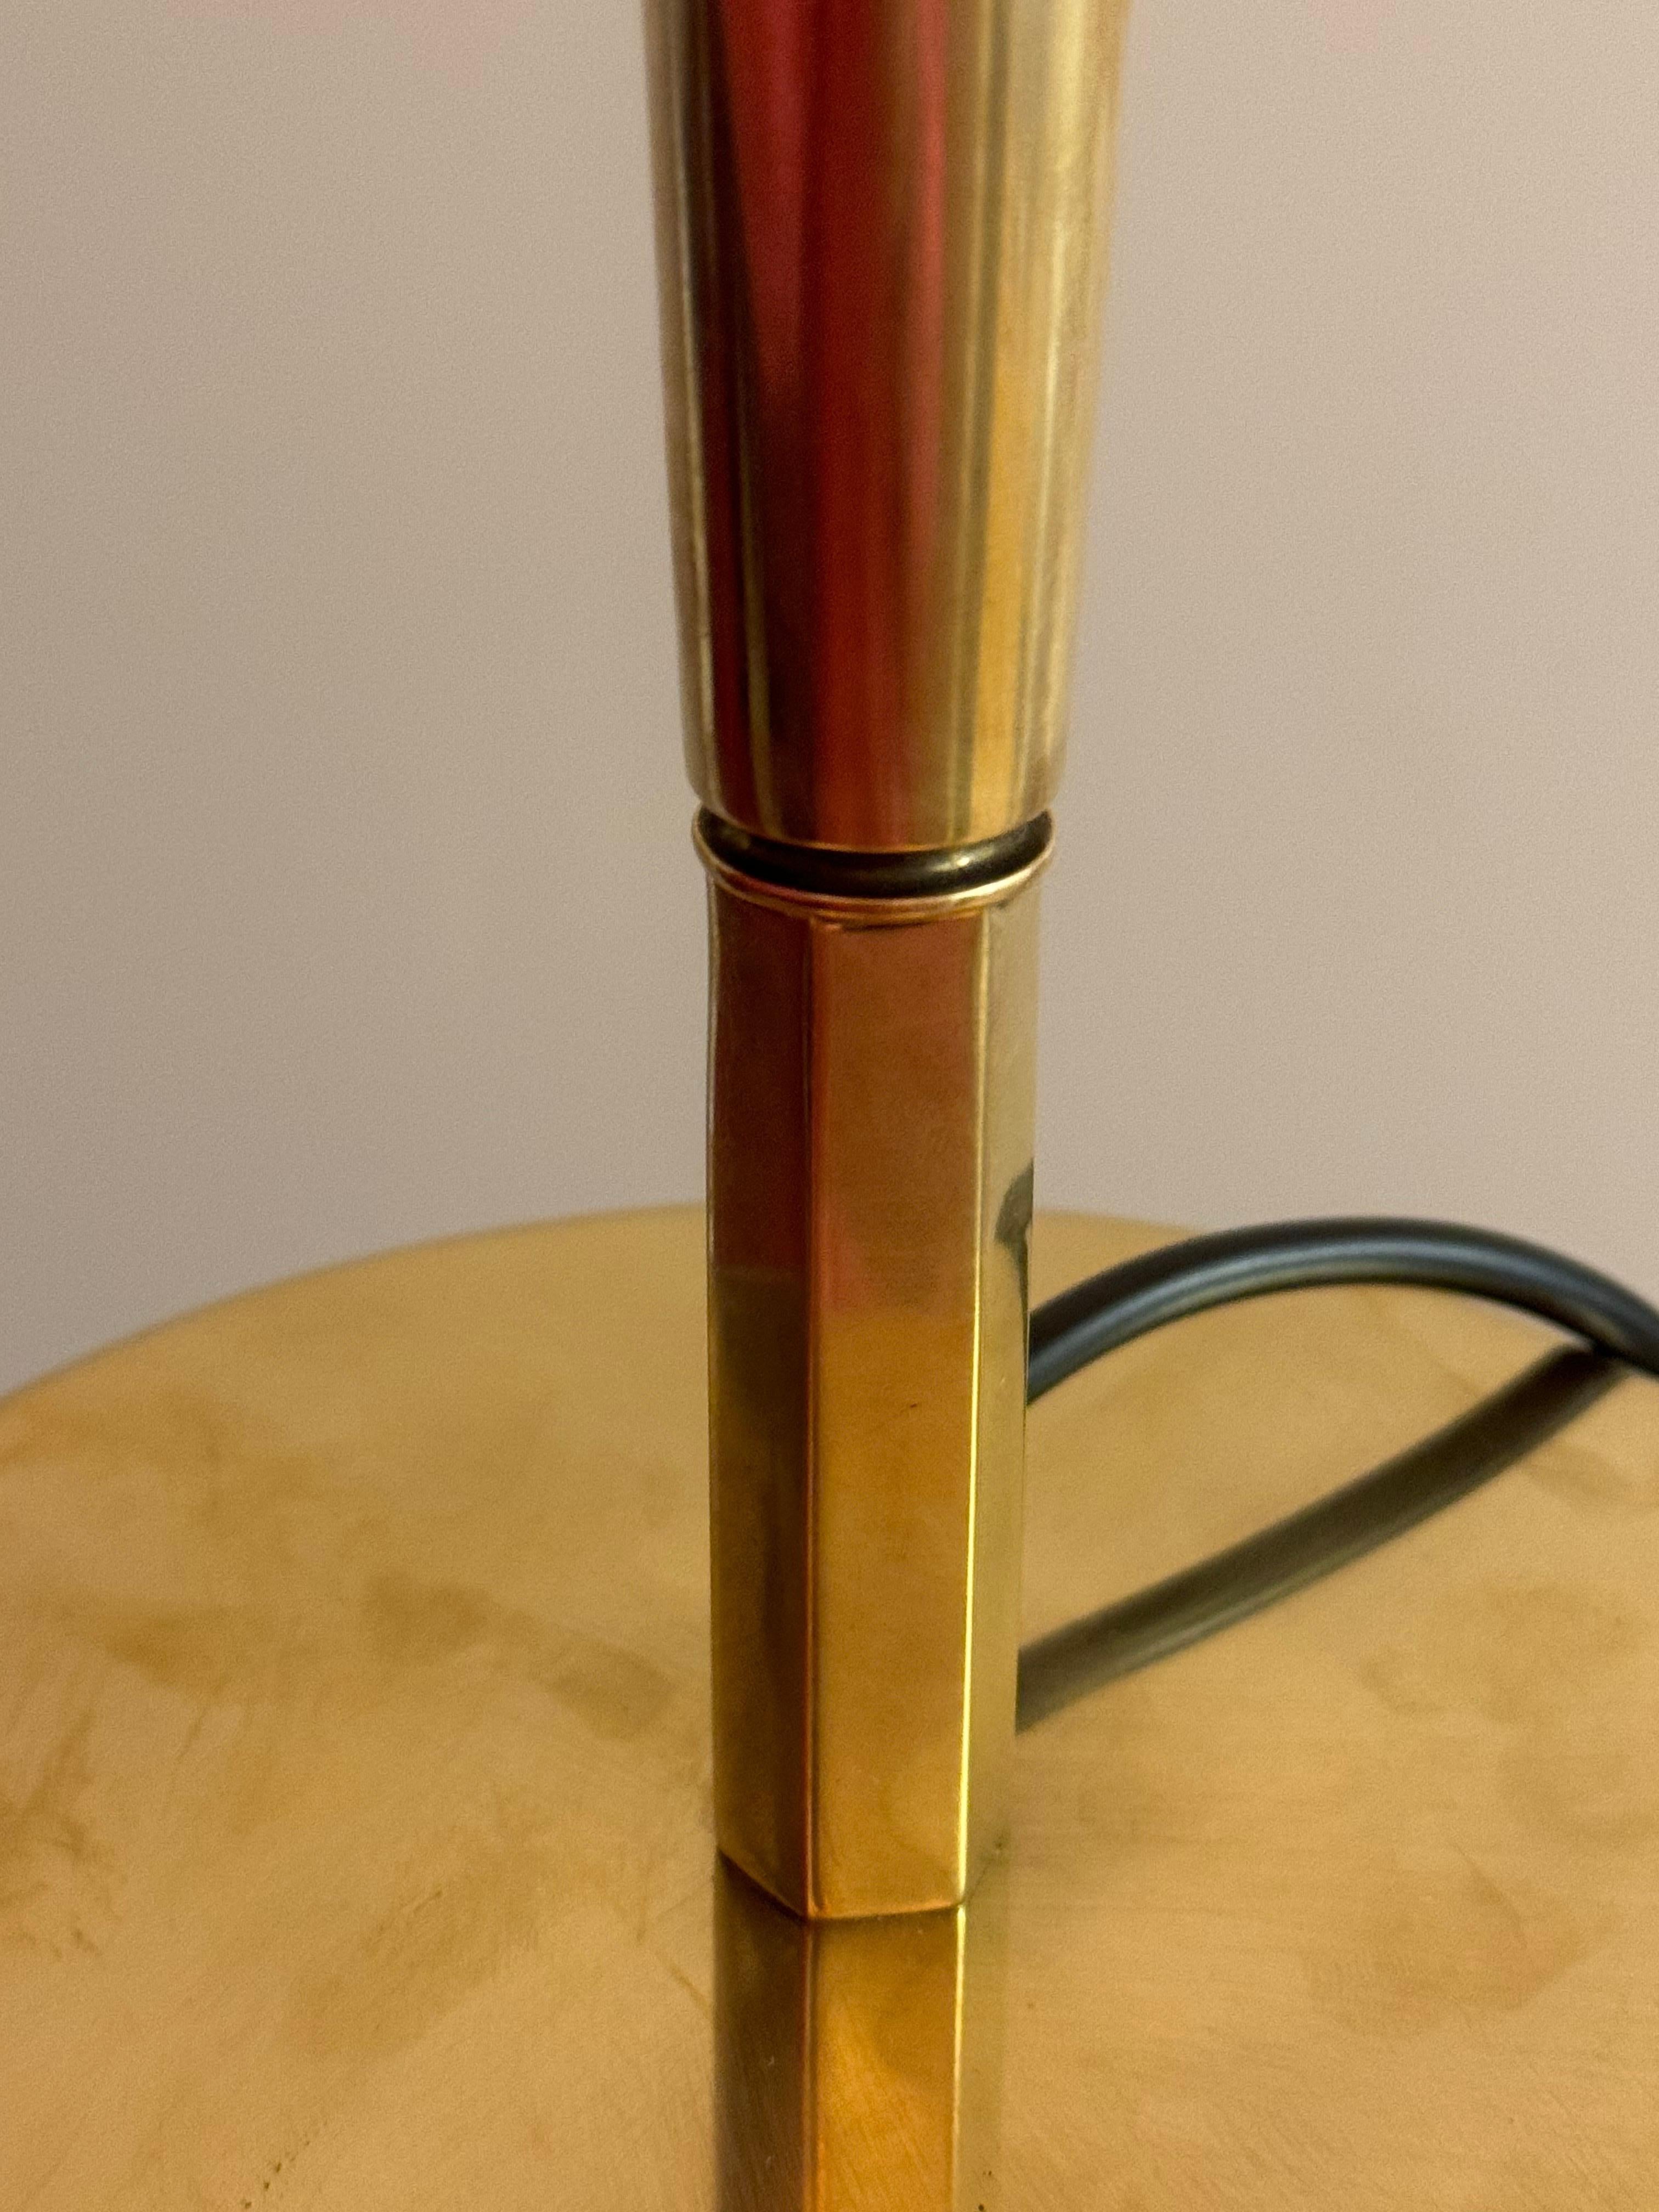 Finnish Rare Brass Table Lamp Mod. 5061 by Paavo Tynell for Taito, Finland, ca. 1940s For Sale